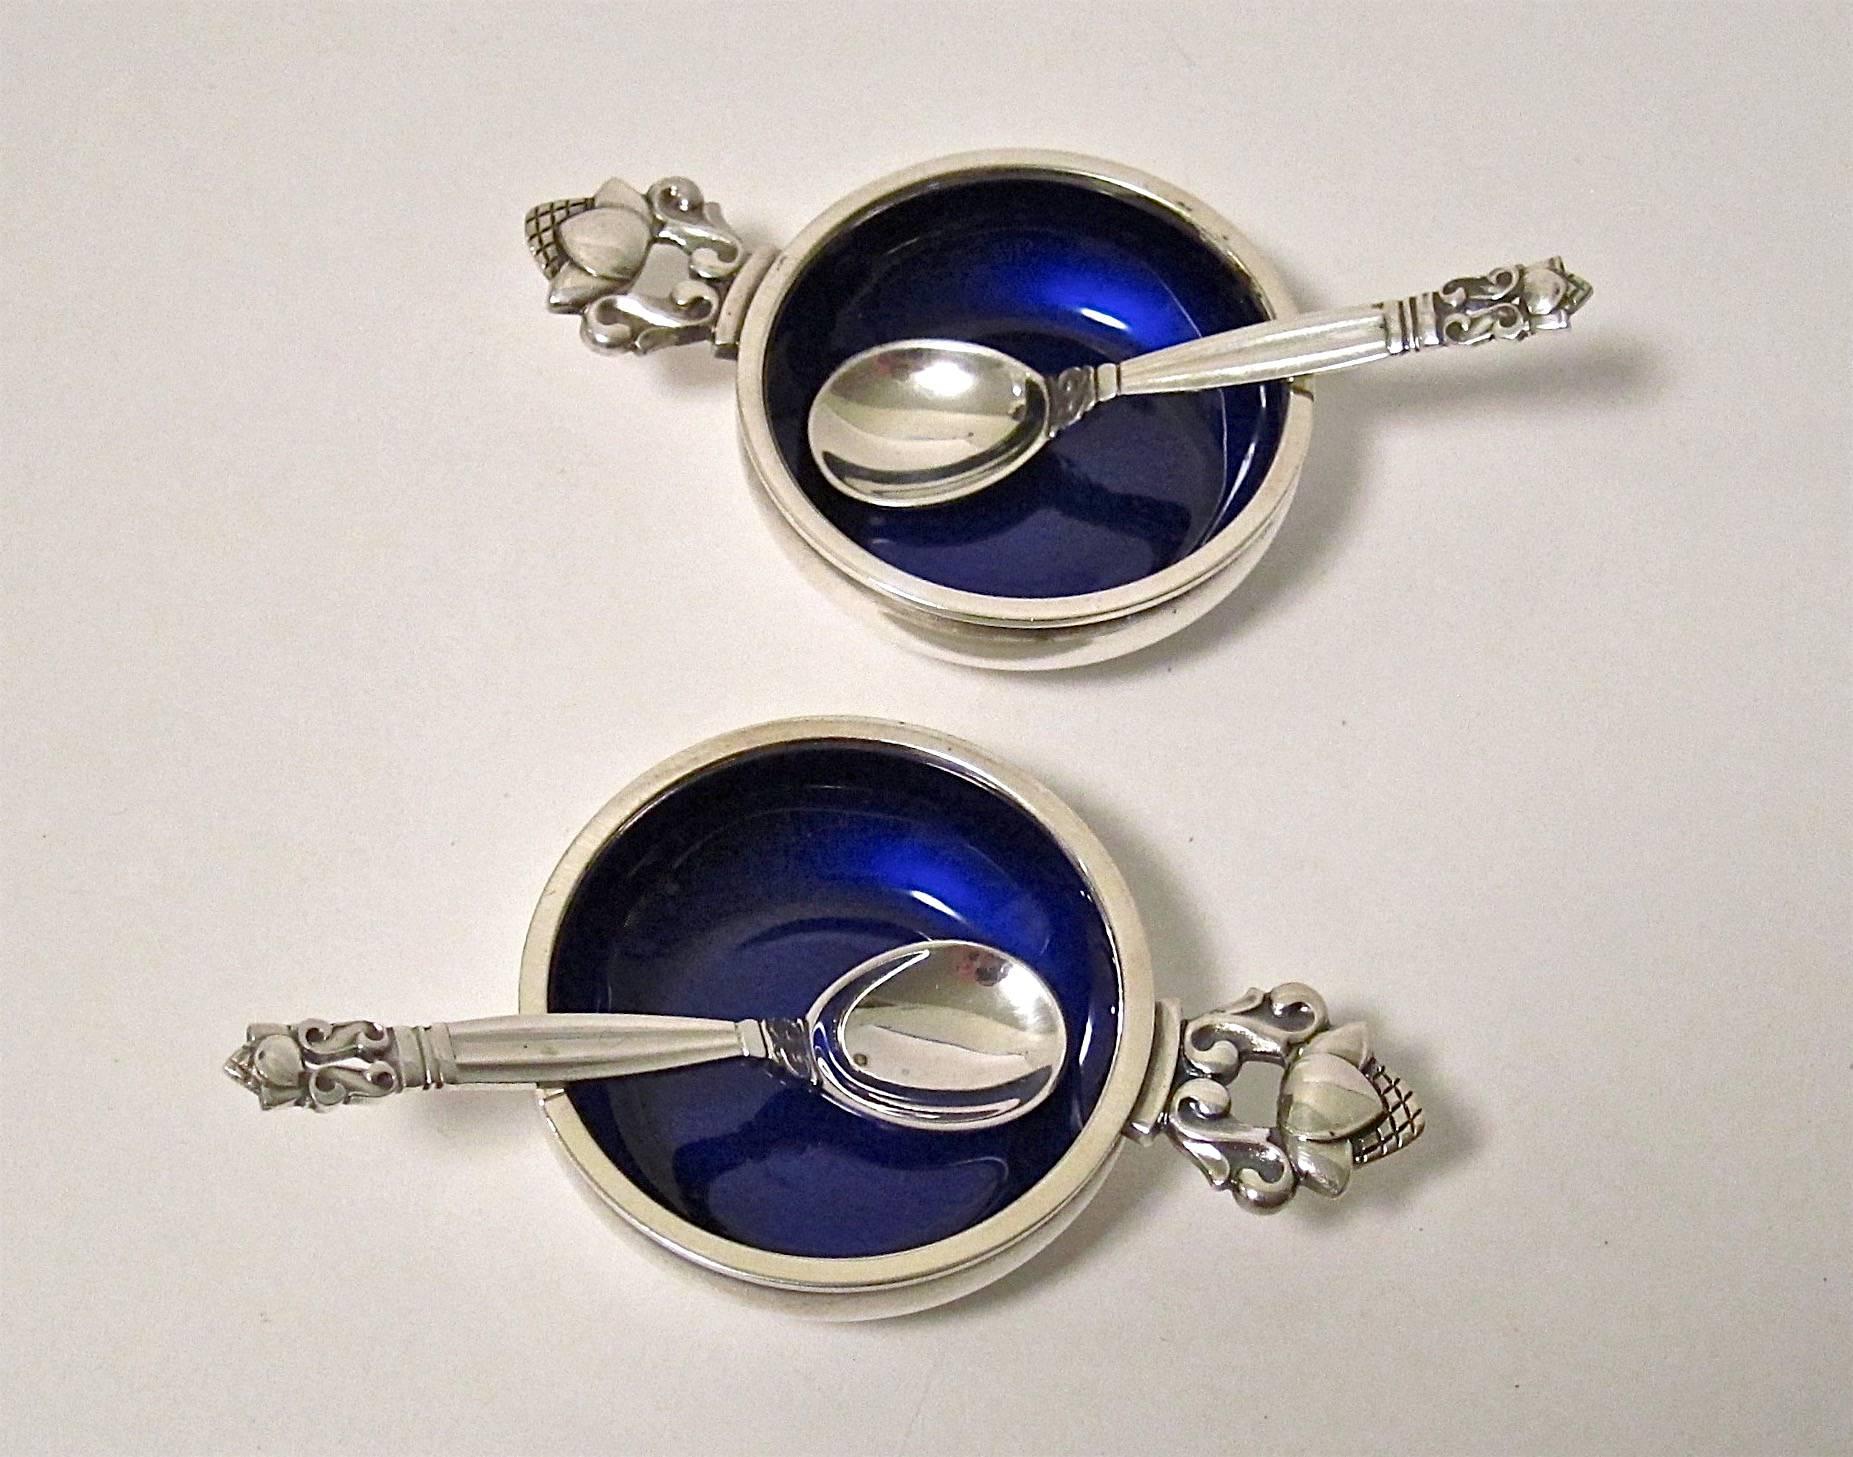 A vintage pair of open salt cellars with matching spoons in Georg Jensen's desirable acorn pattern, each bearing the JR cipher of Johan Rohde (1856-1945) who designed the timeless acorn pattern in 1915. 

Sterling silver with dark blue enameled